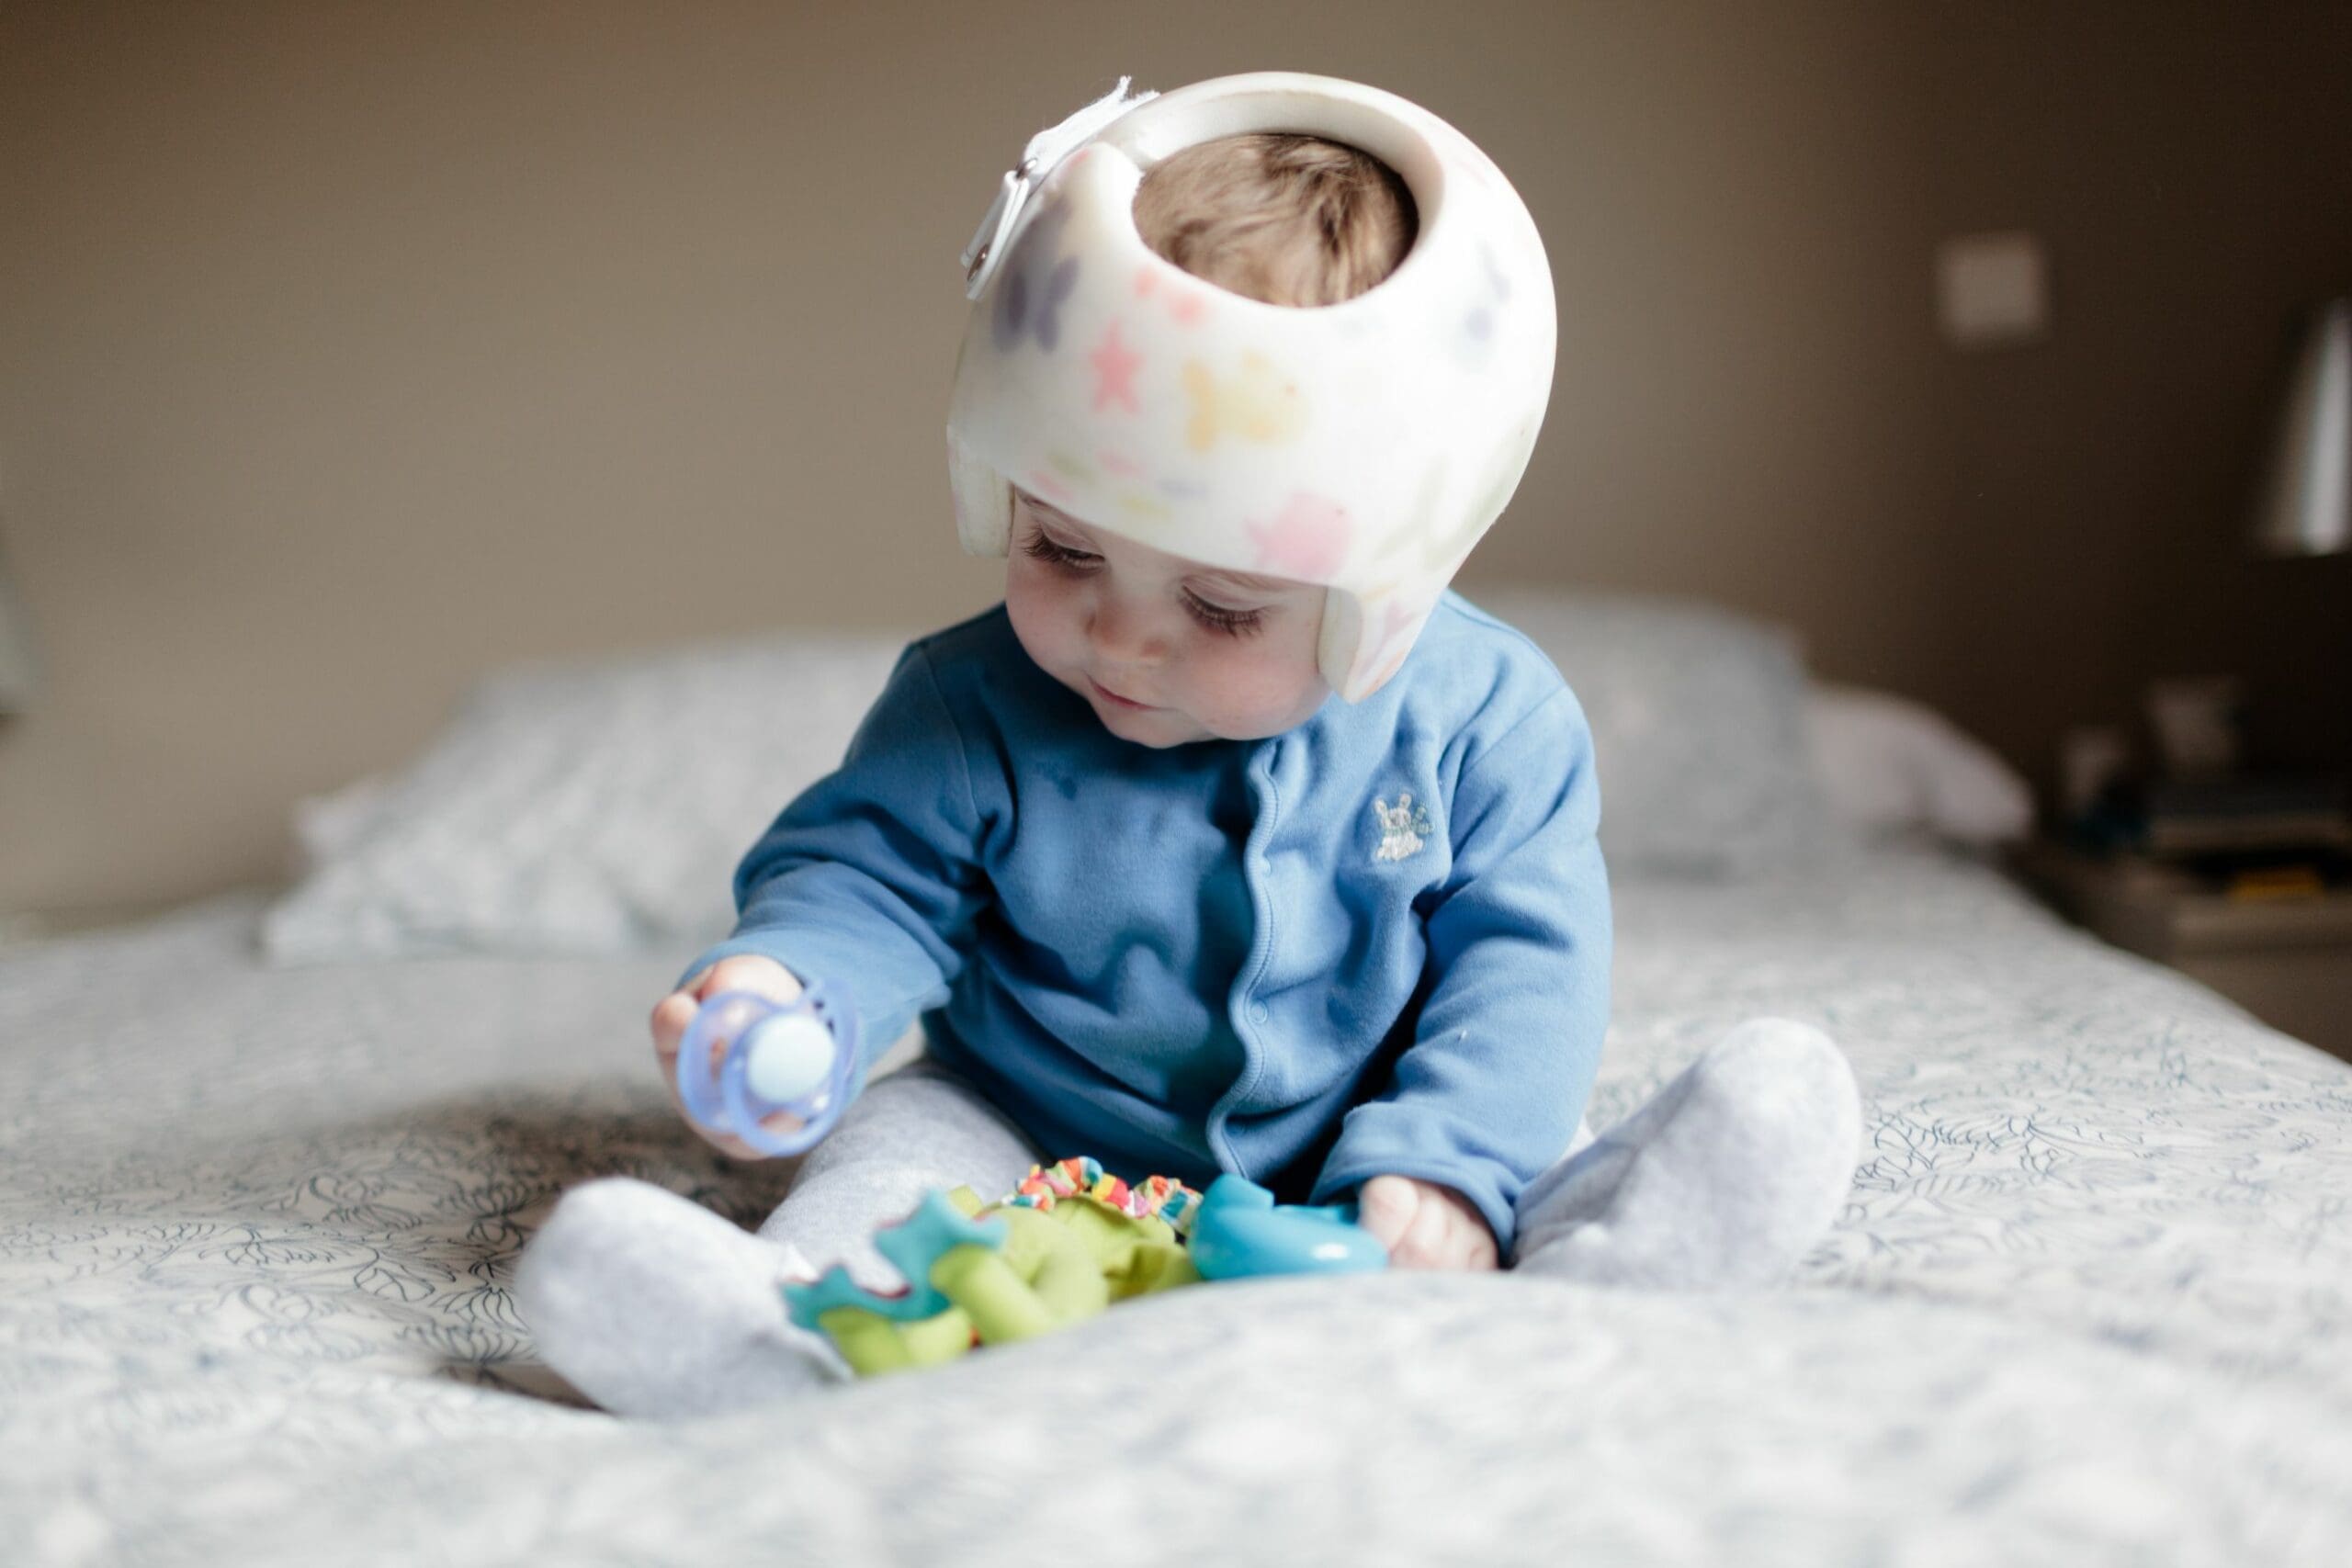 Video: Plagiocephaly – Dr Golly